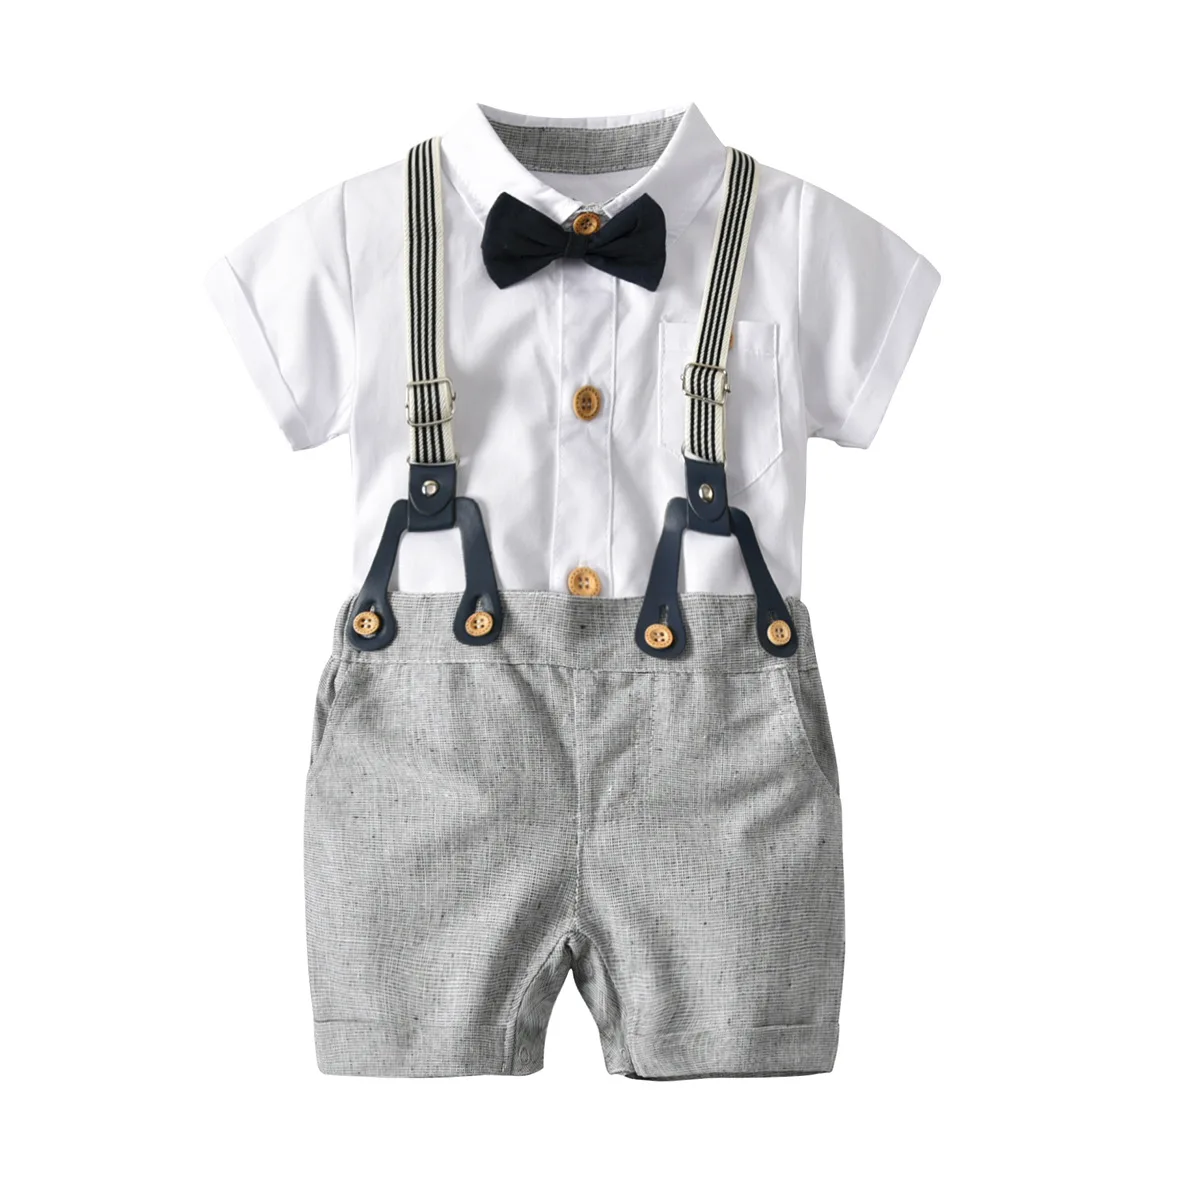 Kidsform Baby Boys Tuxedos Gentleman Suit Short Sleeve Onesie Vest Party Formal Outfit with Necktie Royal 80/12-18 Months